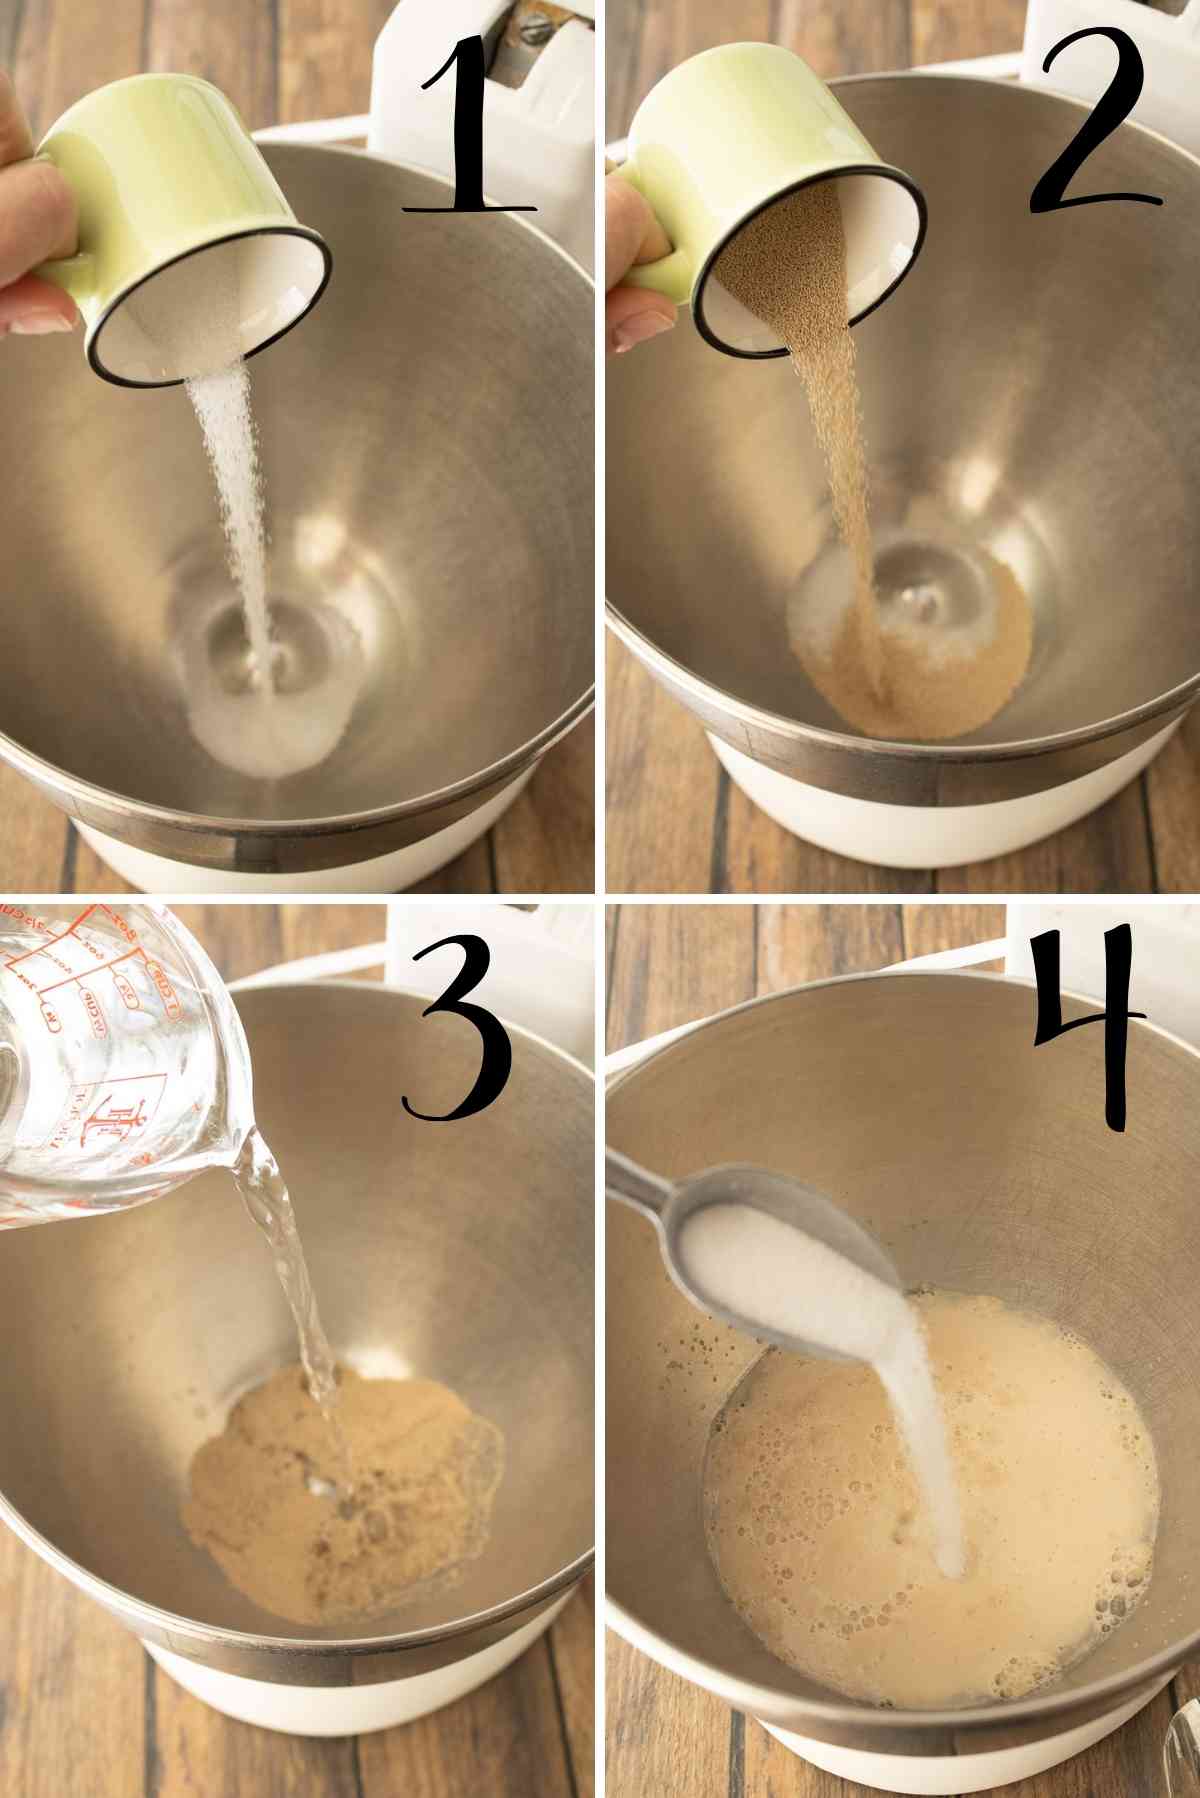 Sugar, yeast, and warm water added to a mixing bowl.